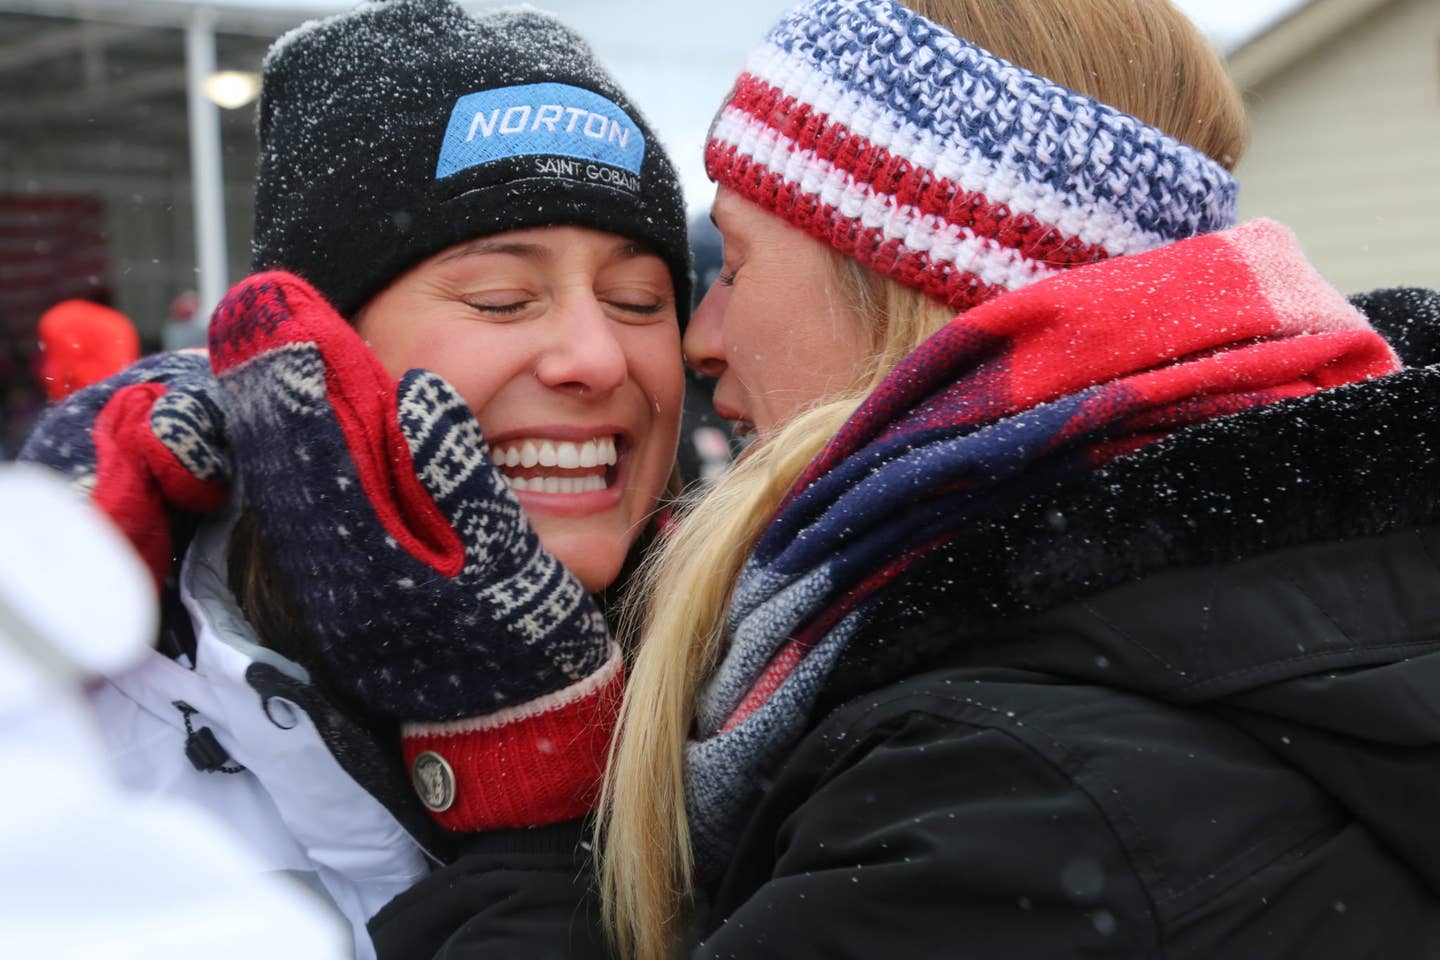 Sgt. Emily Sweeney (left) is congratulated by her sister, Megan, after qualifying for the 2018 Winter Games in luge women's singles Dec. 16 at Lake Placid, New York. Emily missed making the 2010 Games in Vancouver after losing to Megan in a race off. Emily Sweeney makes her Olympic debut next month in PyeongChang, South Korea. (U.S. Army photo by Spc. Jennily Leon)